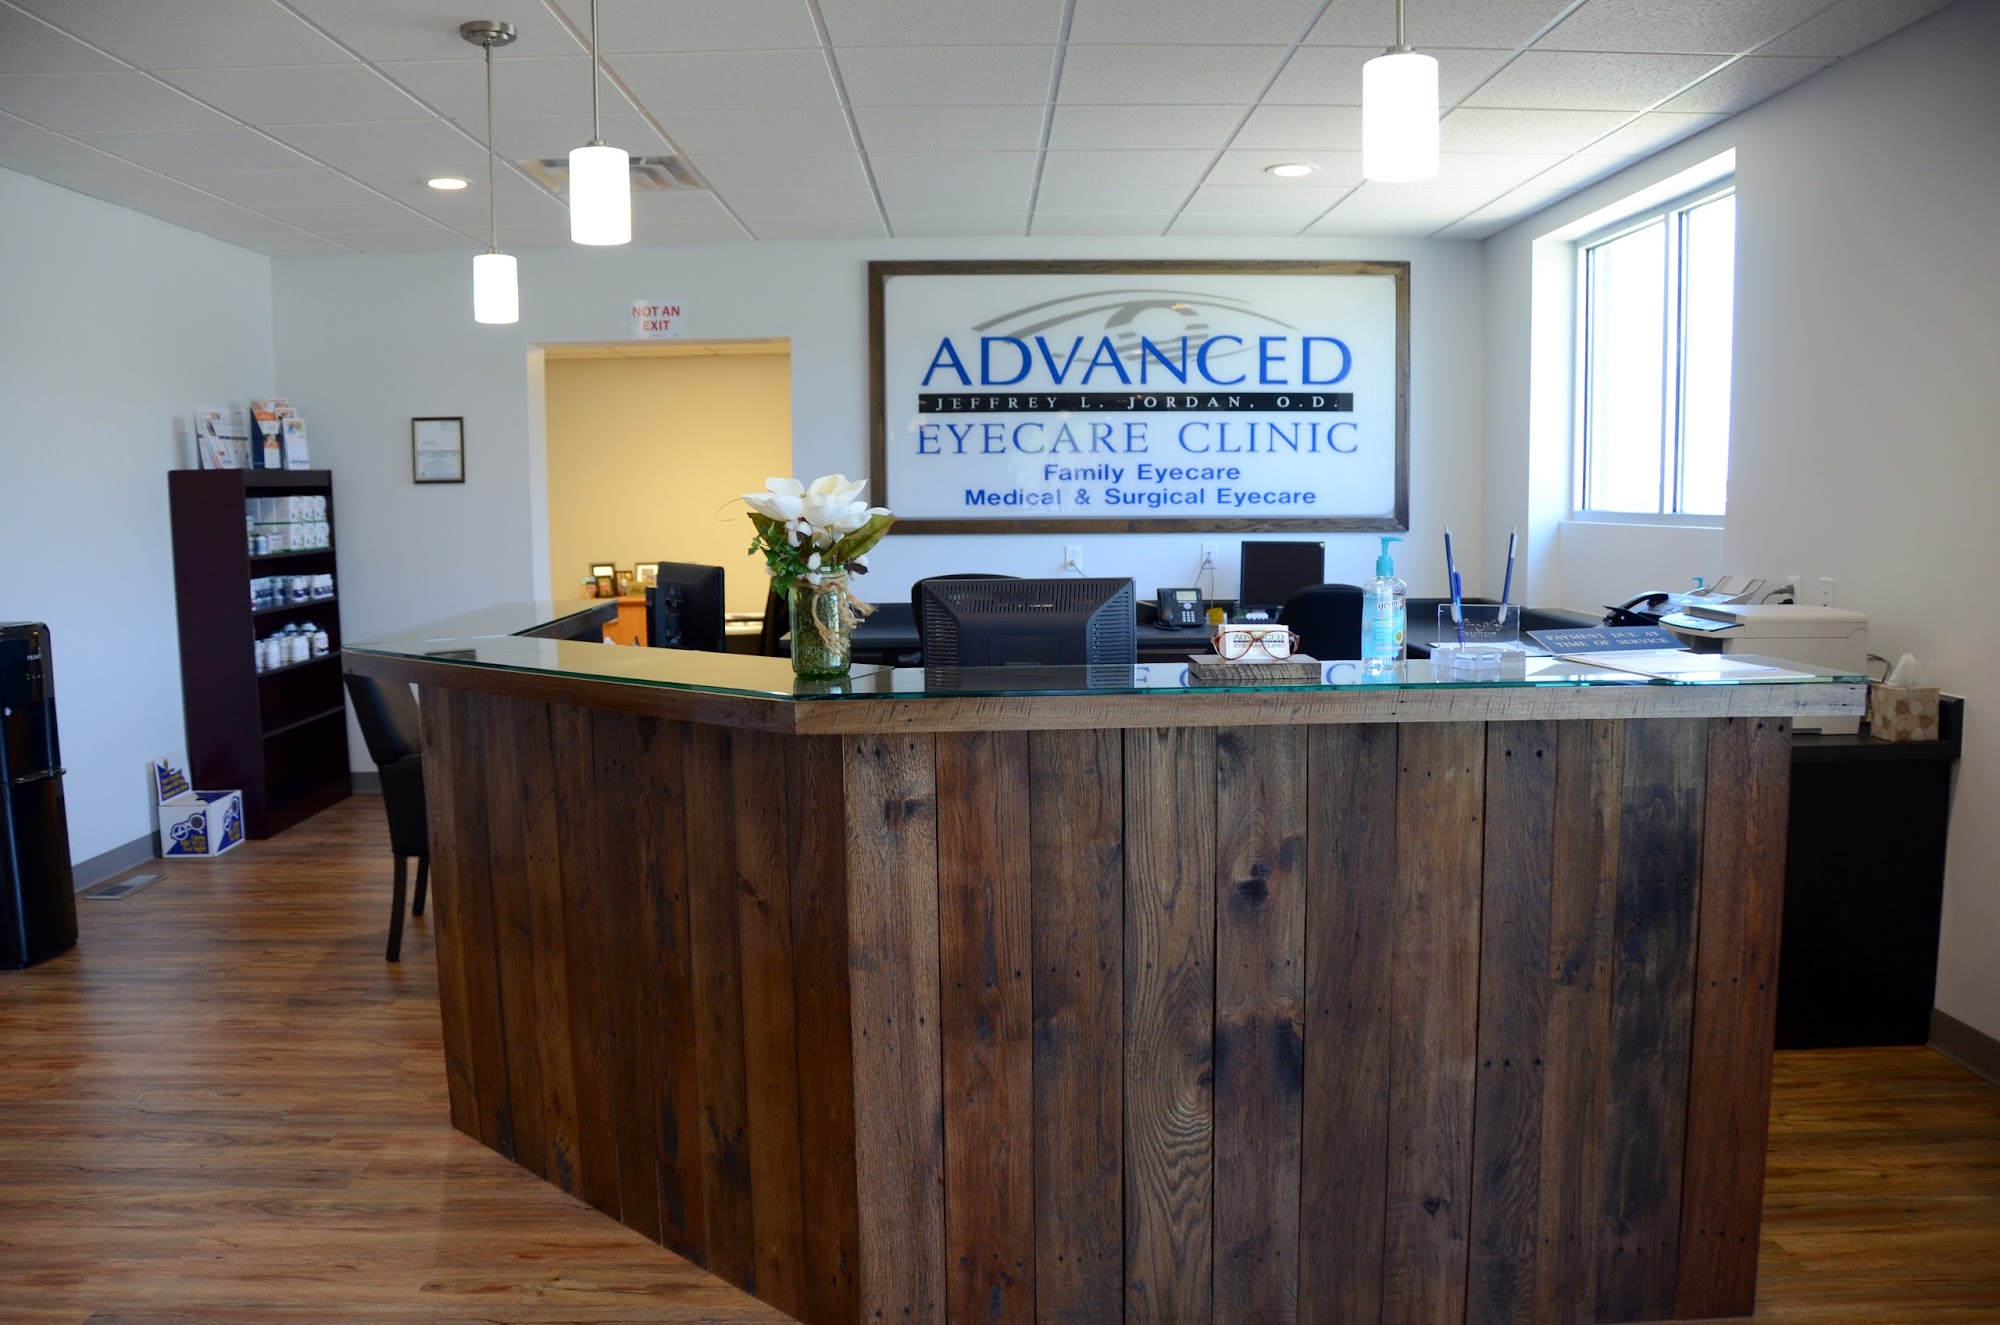 Advanced Eyecare Clinic 815 E Commerce St, Lewisburg Tennessee 37091